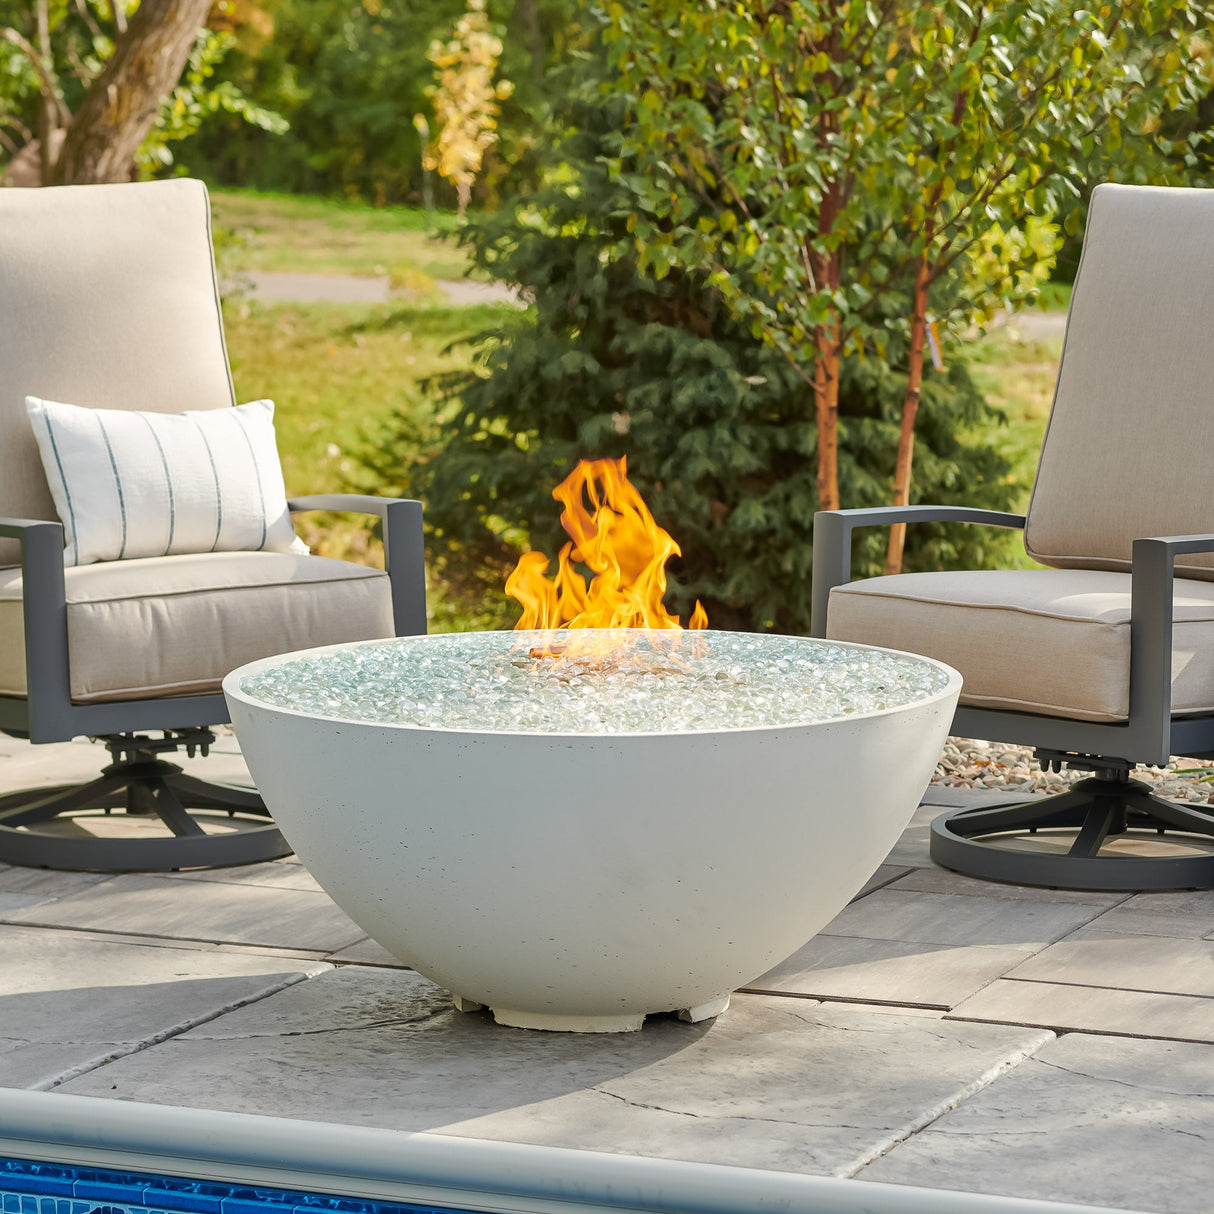 A large flame coming from the White Cove Edge Round Gas Fire Pit Bowl 42" surrounded by lounge chairs